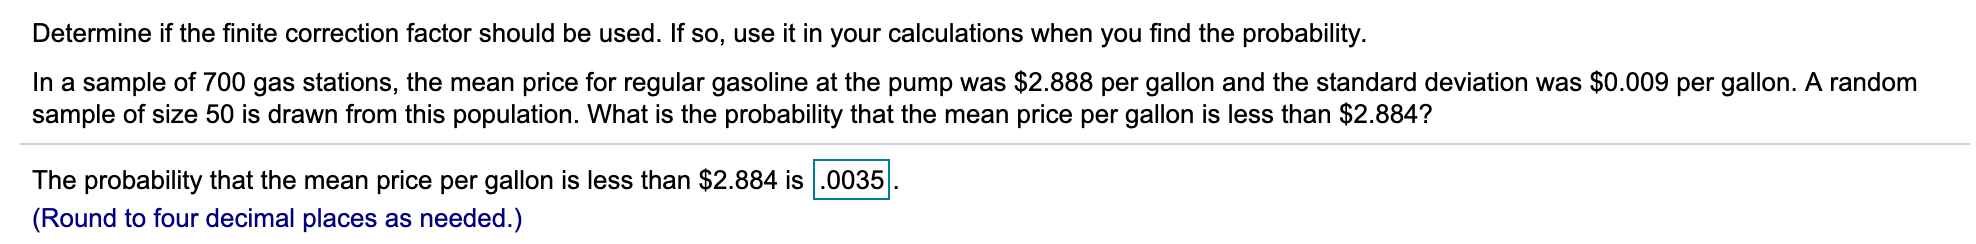 Determine if the finite correction factor should be used. If so, use it in your calculations when you find the probability.
In a sample of 700 gas stations, the mean price for regular gasoline at the pump was $2.888 per gallon and the standard deviation was $0.009 per gallon. A random
sample of size 50 is drawn from this population. What is the probability that the mean price per gallon is less than $2.884?
The probability that the mean price per gallon is less than $2.884 is.0035
(Round to four decimal places as needed.)
